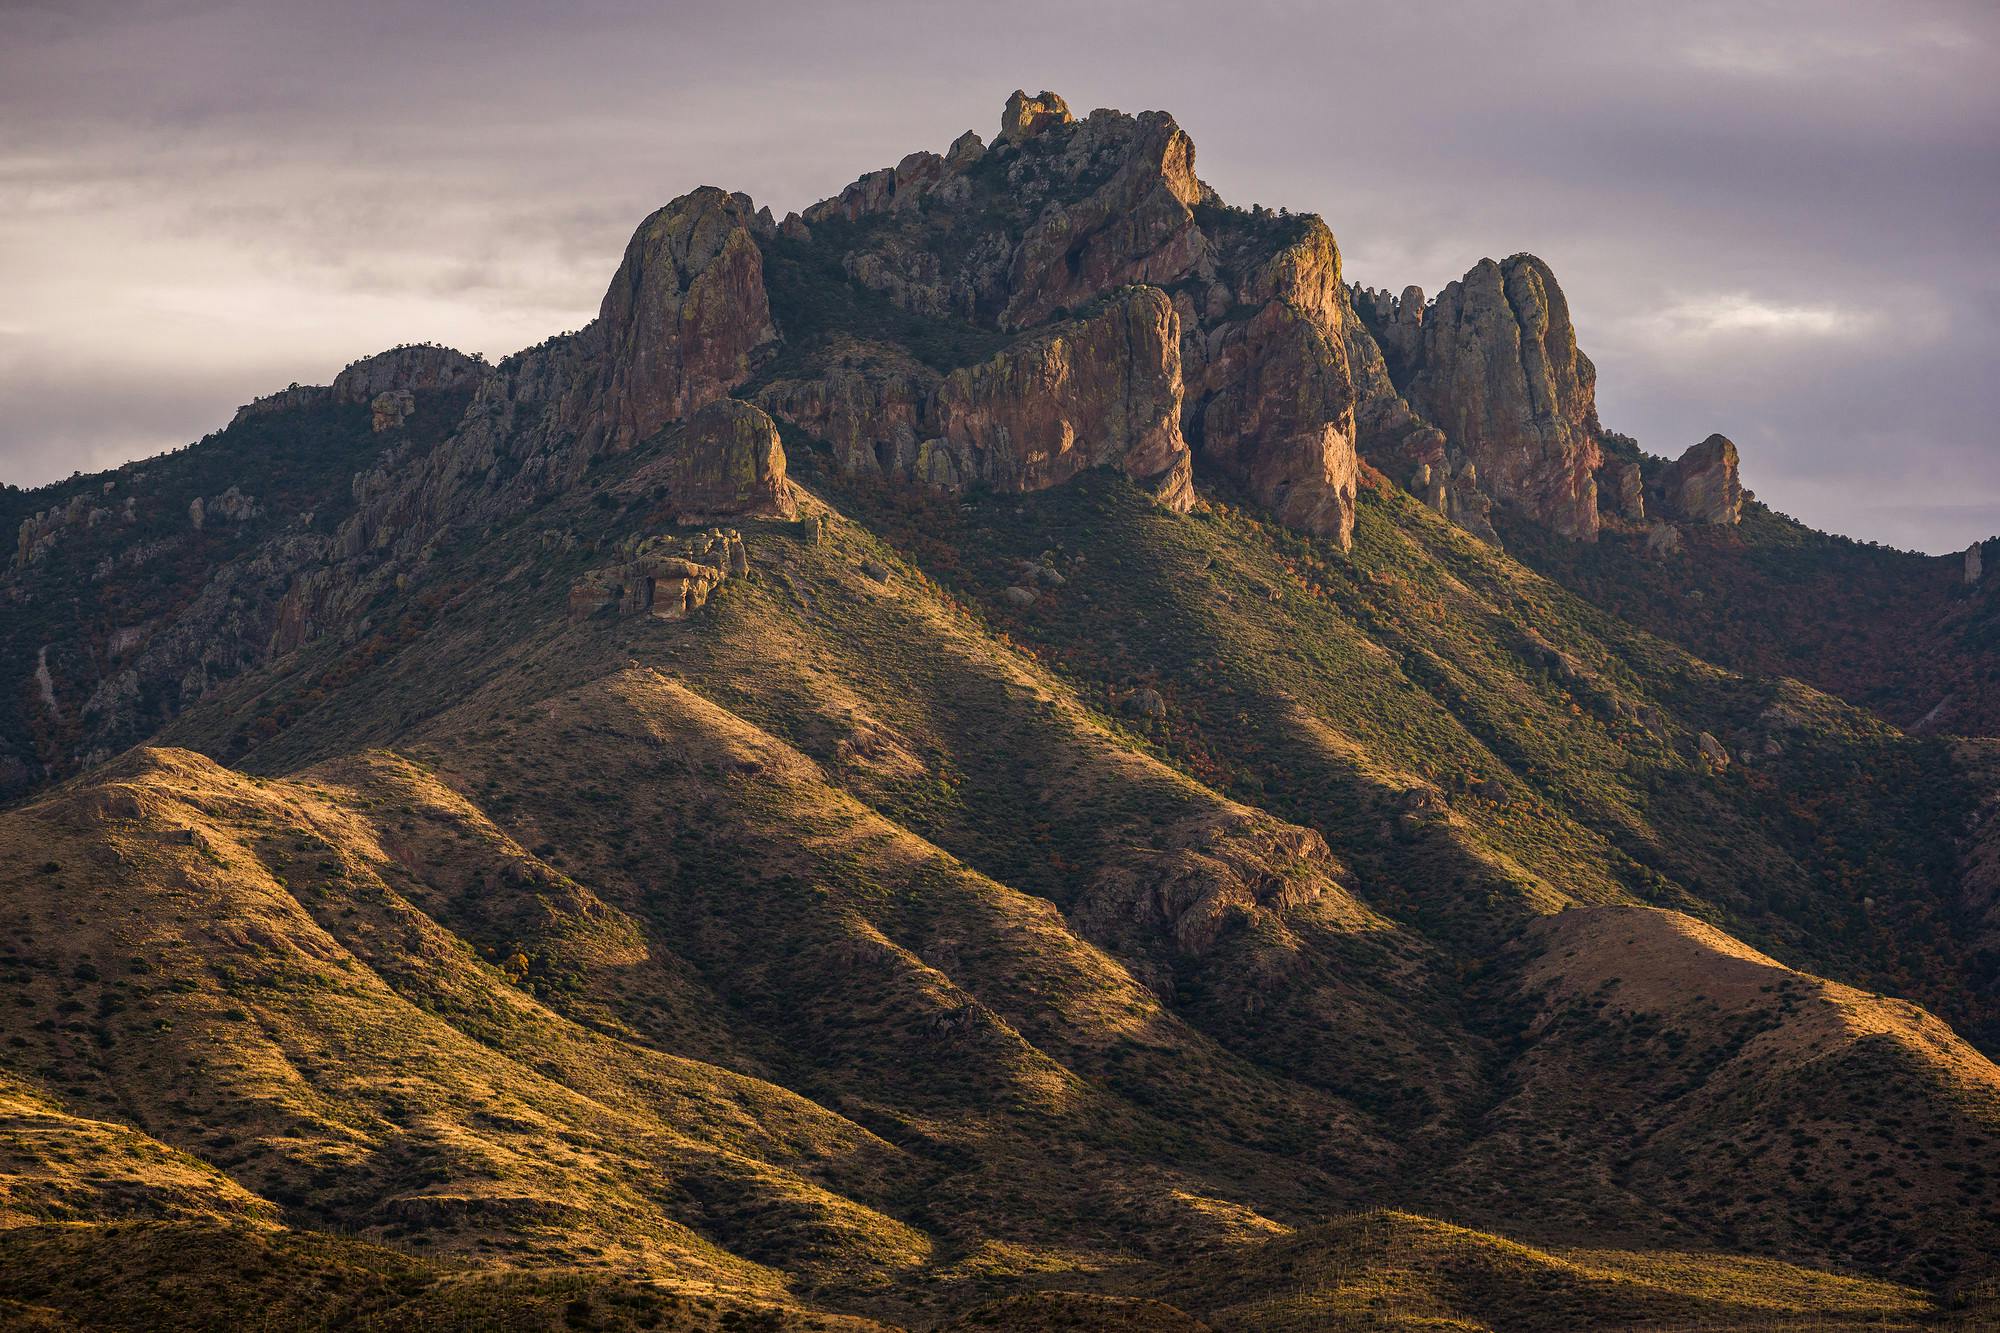 Evening Light on the Chisos Mountains